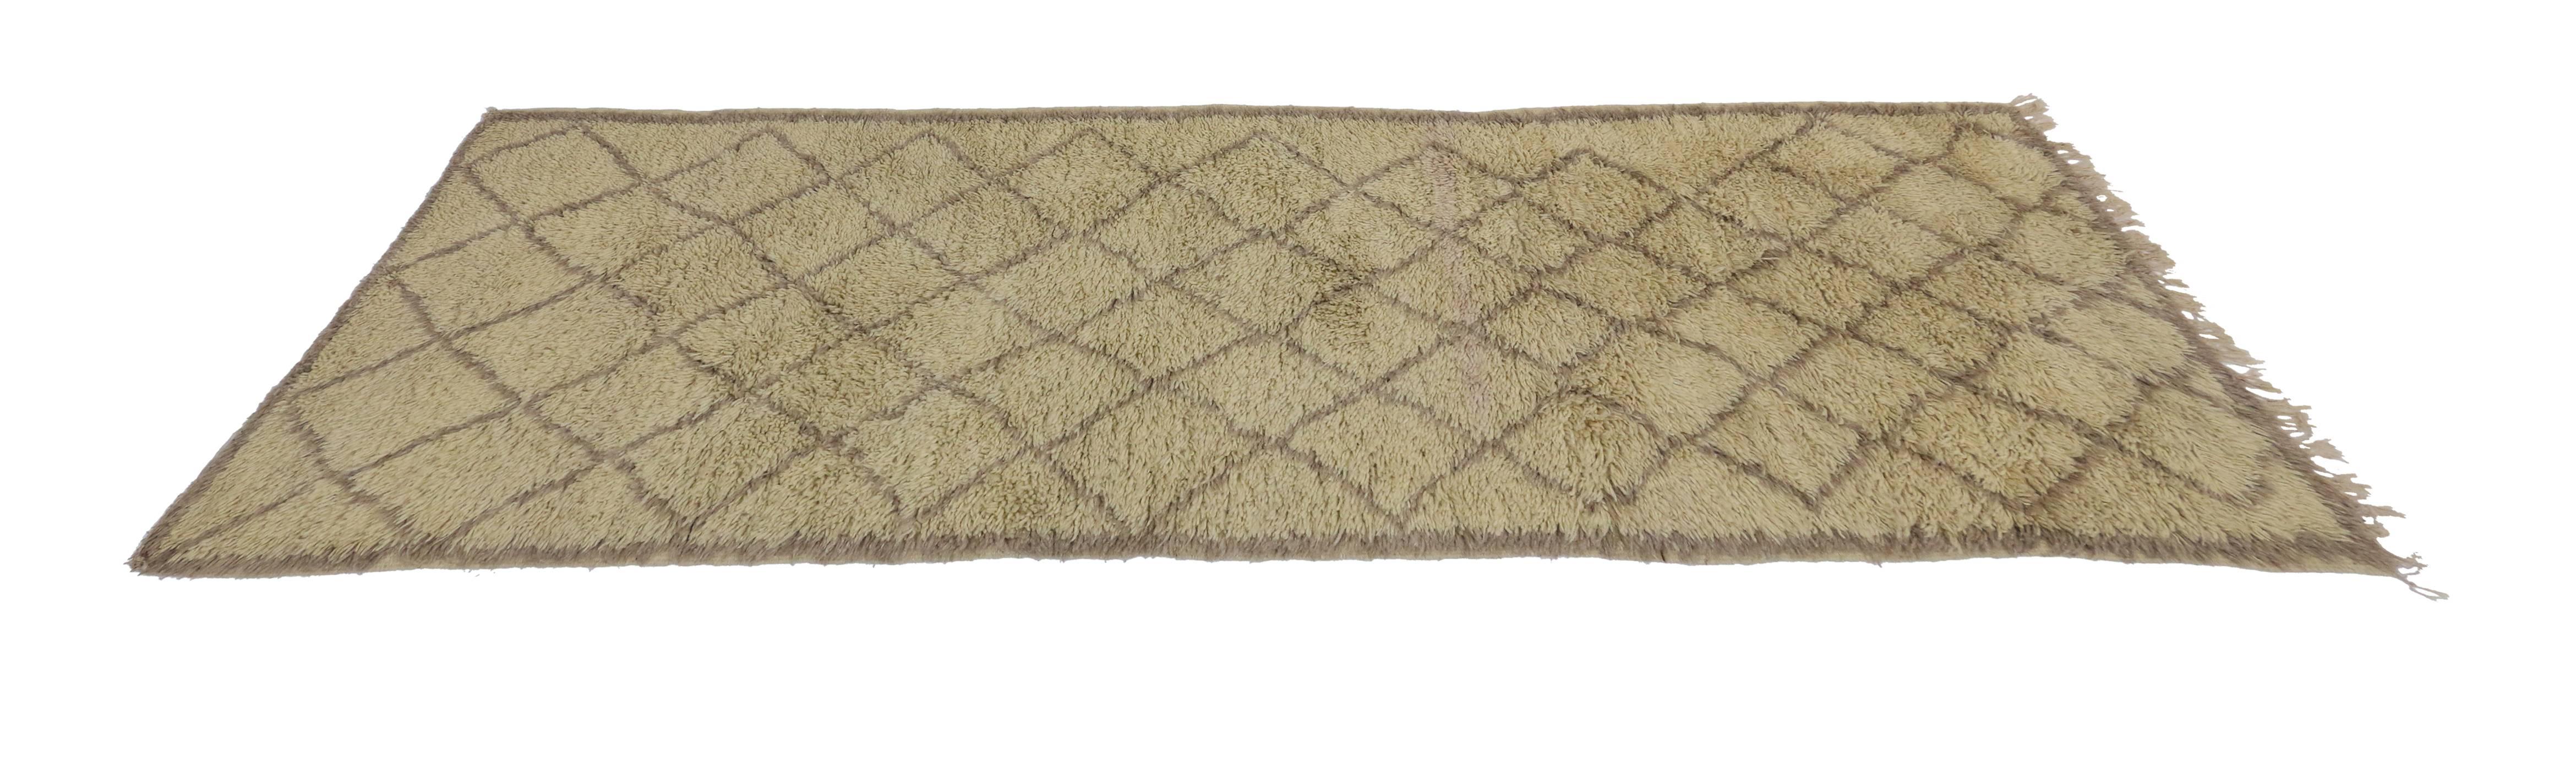 Hand-Knotted Mid-Century Modern Berber Moroccan Carpet Runner with Minimalist Design